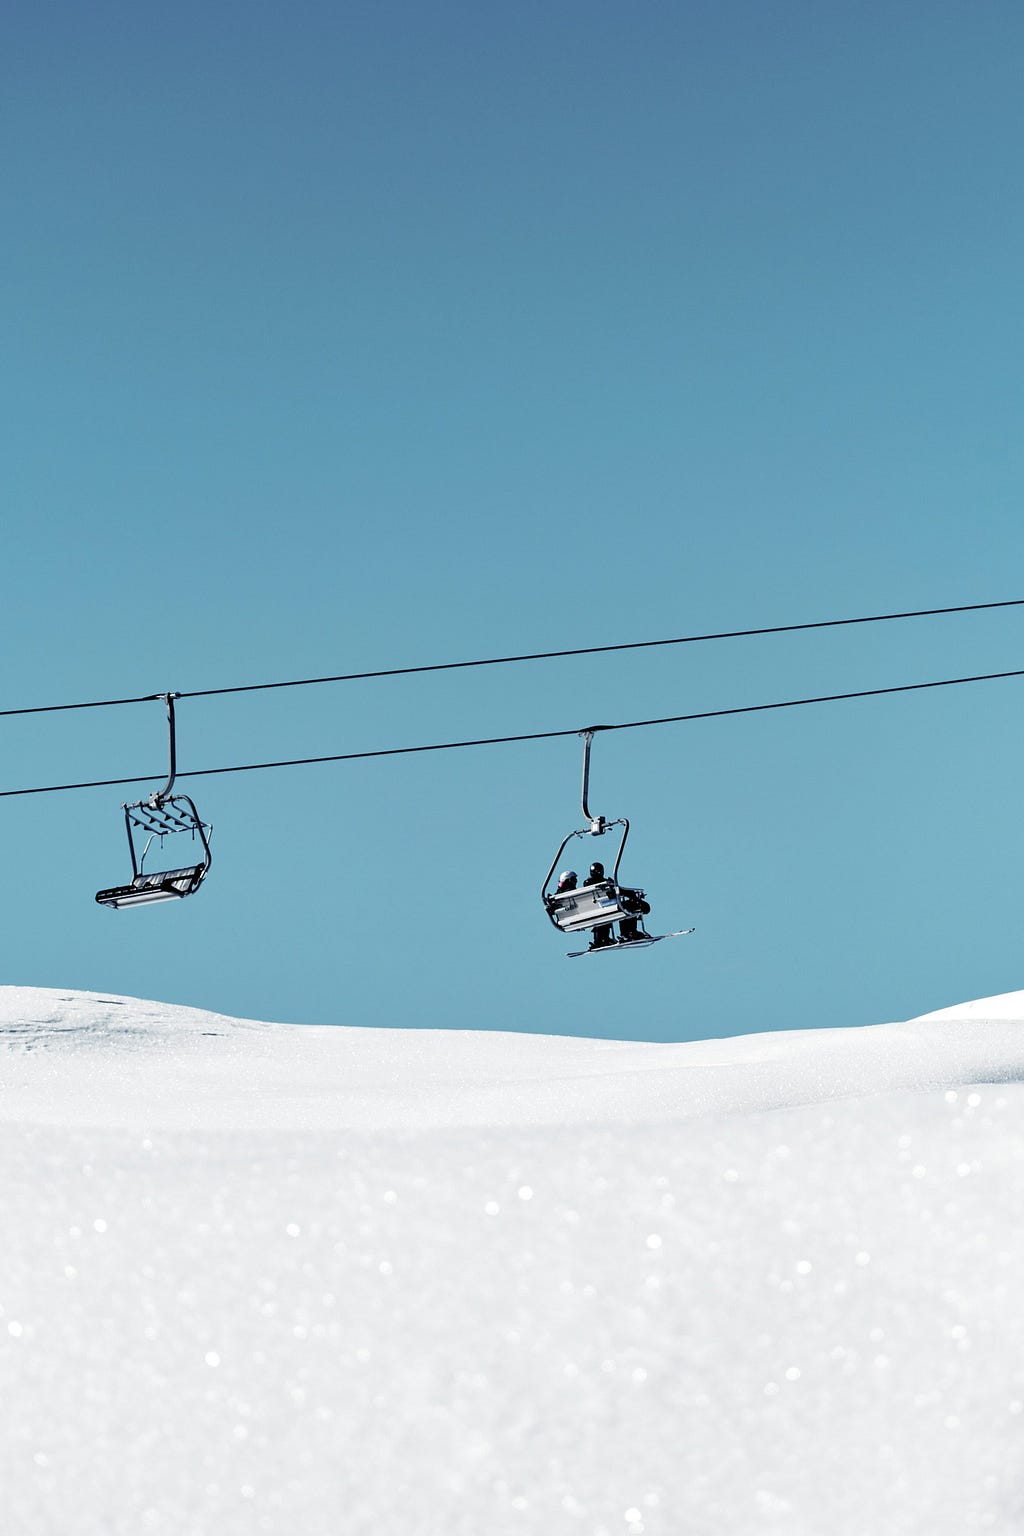 Ski lift chairs against a clear blue sky, with two skiers on the further chair above a sparkling snow-covered slope. The descending chair is empty.